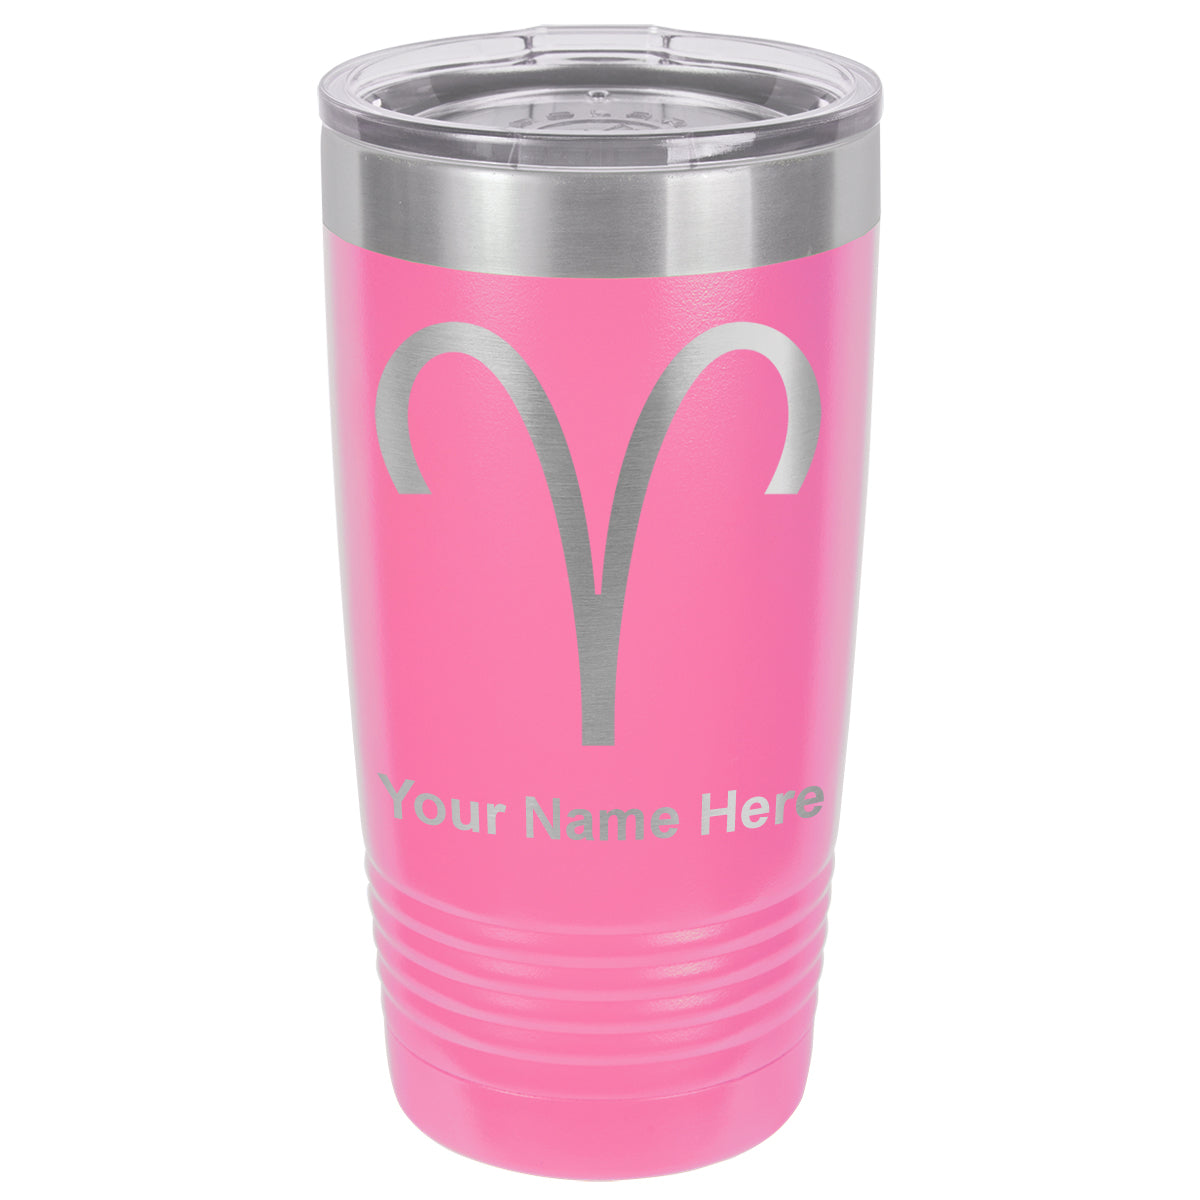 20oz Vacuum Insulated Tumbler Mug, Zodiac Sign Aries, Personalized Engraving Included